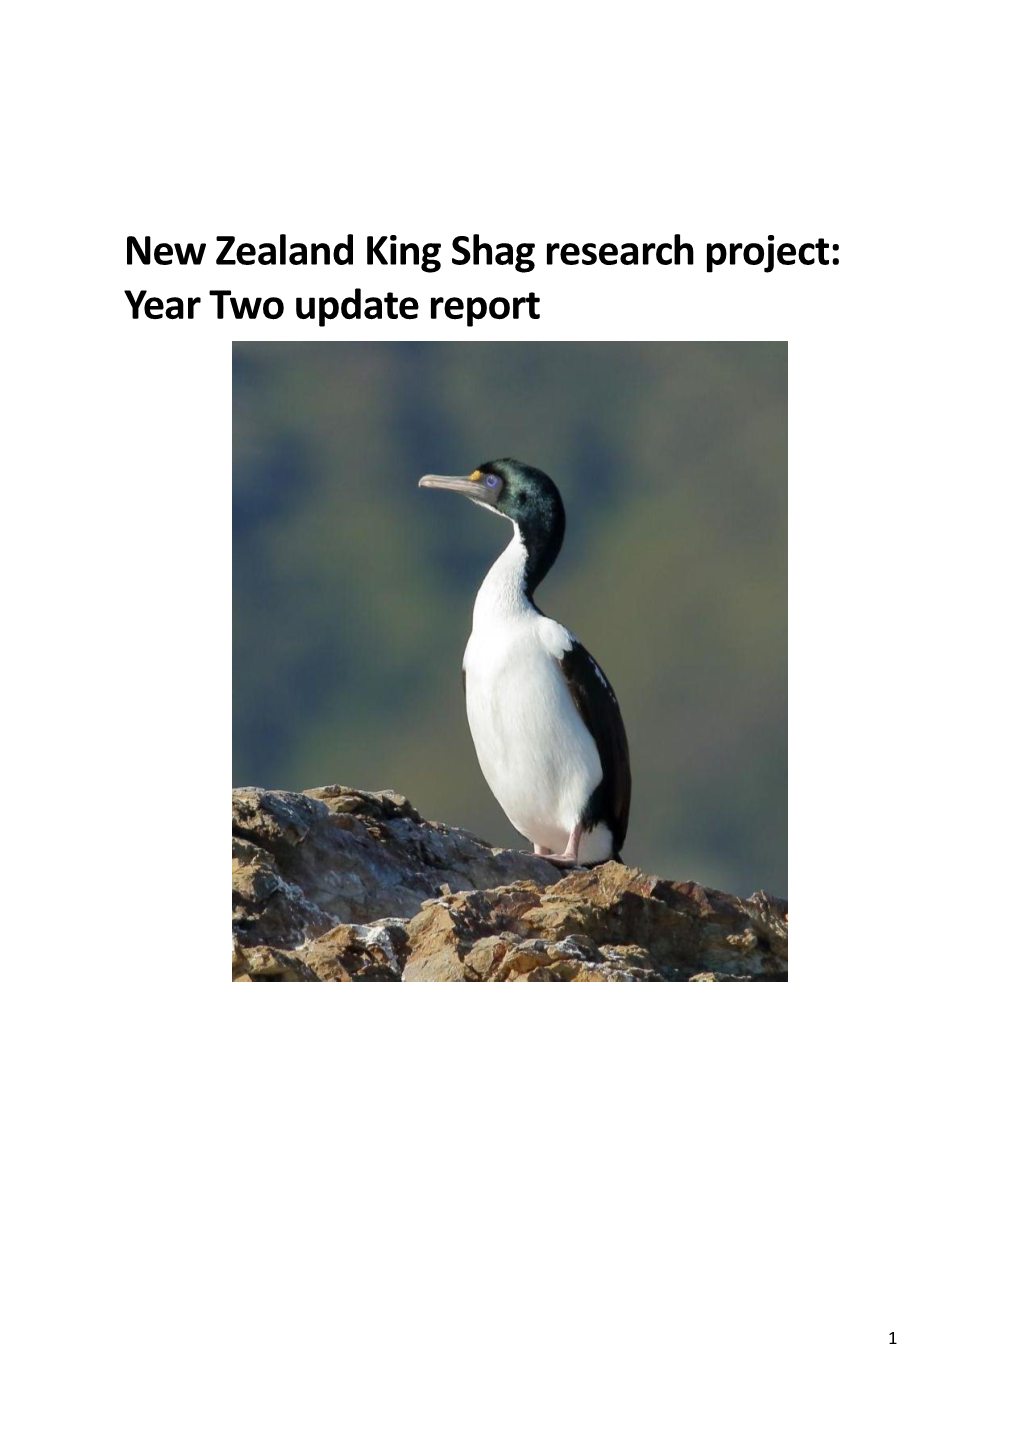 New Zealand King Shag Research Project: Year Two Update Report